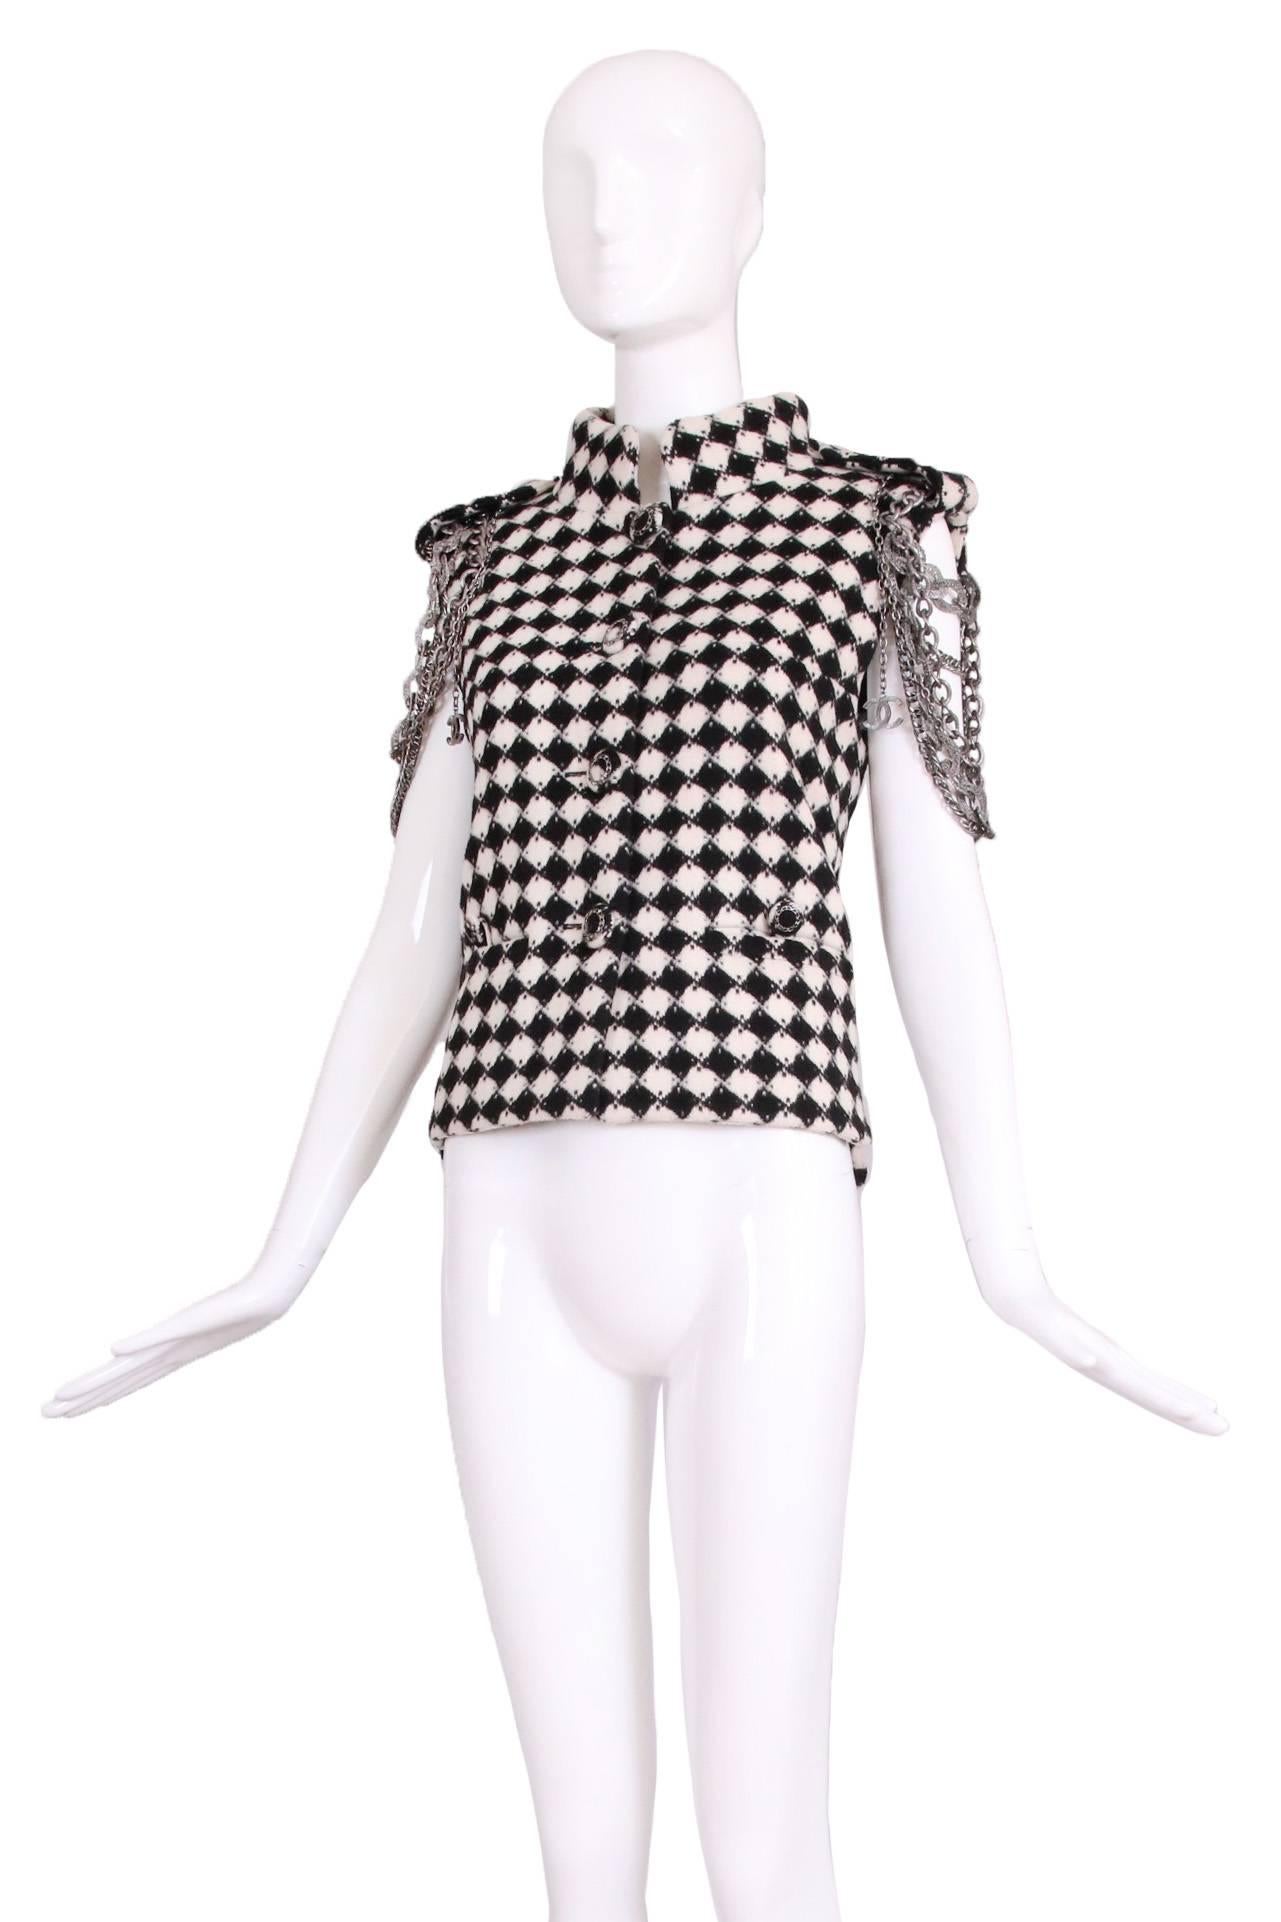 2011 A/H Chanel post-apocalyptic collection black and white diamond print wool vest with shoulder lapels, oversized chain-decorated buttons and loose oversized curb-link chain at the shoulders. Fully lined in silk. In excellent condition. No size